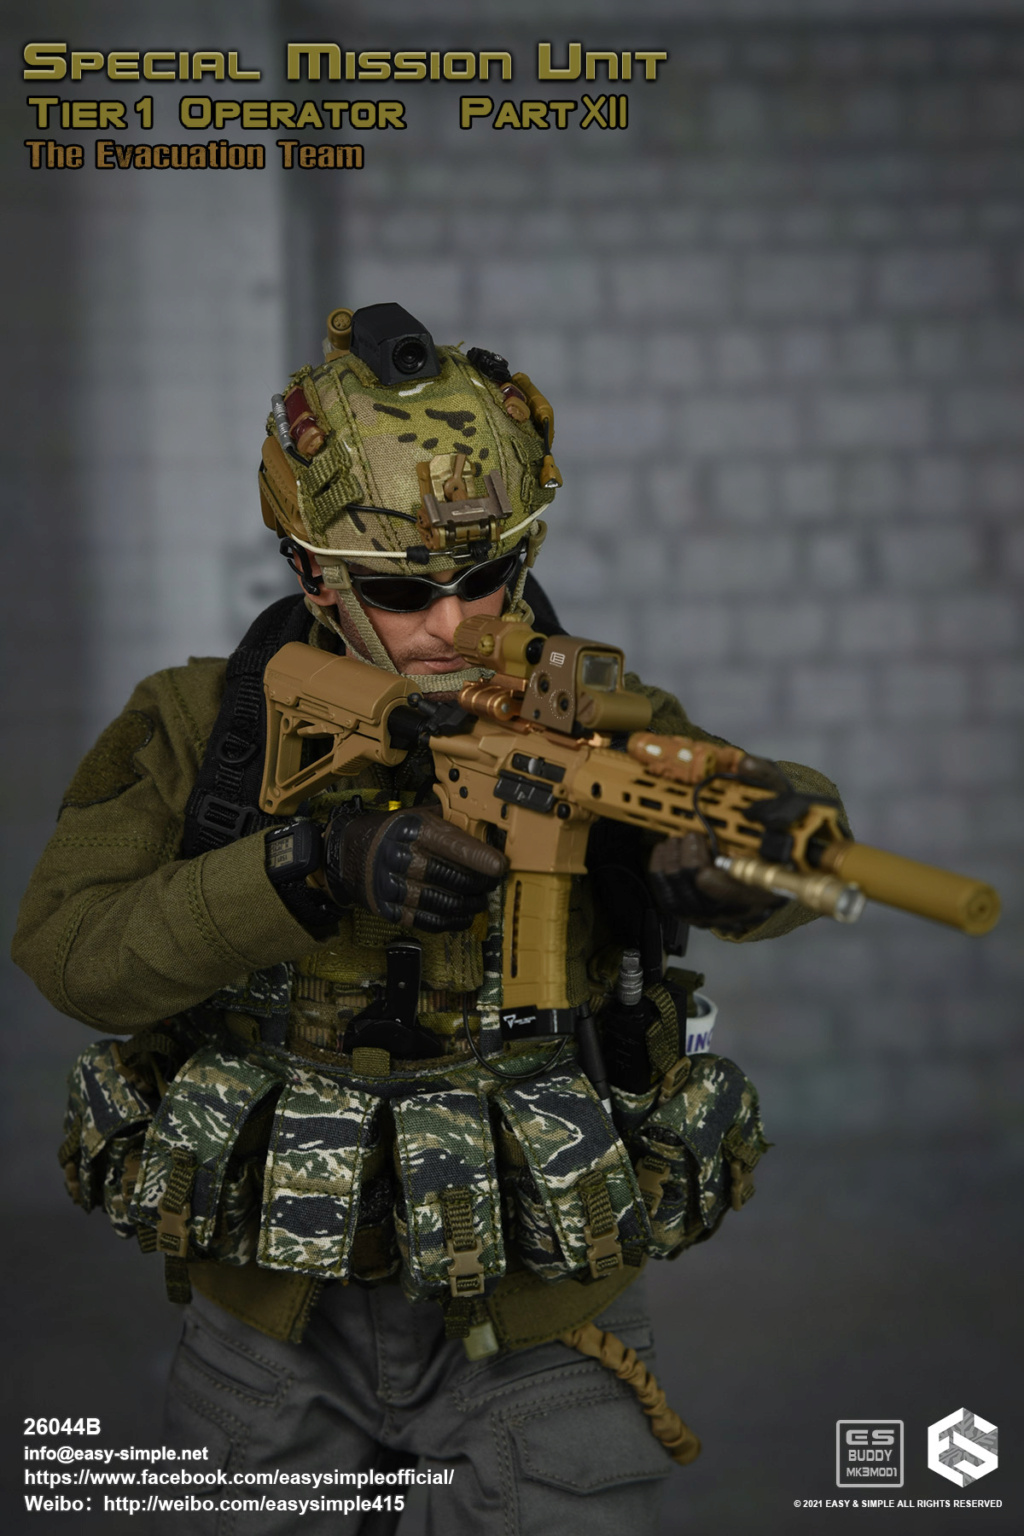 Tier1Operator - NEW PRODUCT: Easy&Simple: 26044B Special Mission Unit Tier1 Operator Part XII The Evacuation Team 4dac3d10